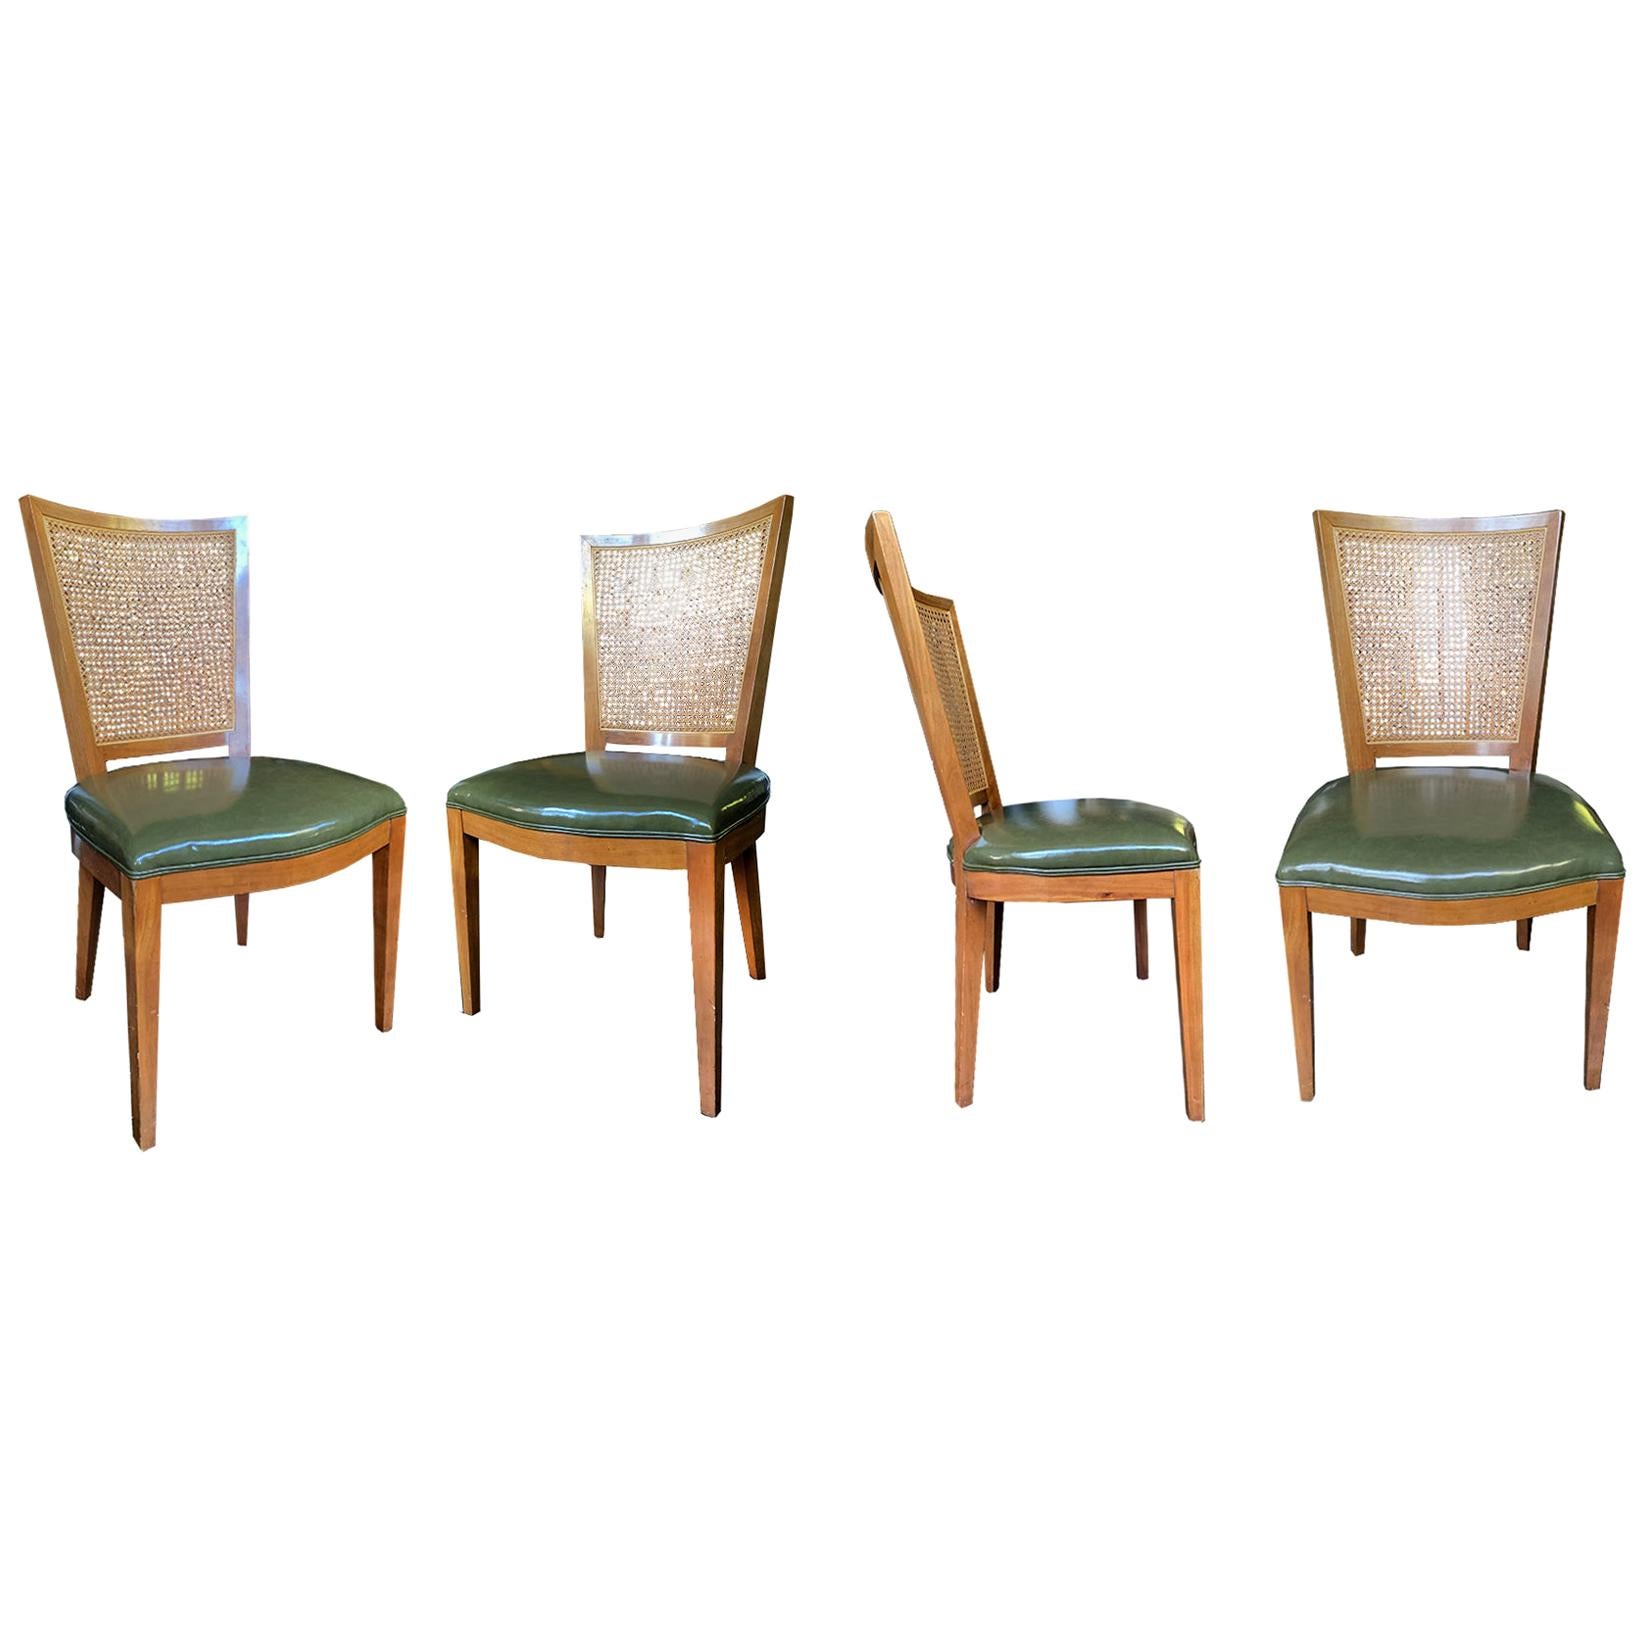 Baker Beech and Faux Leather Chairs with Caning, a Set of 4